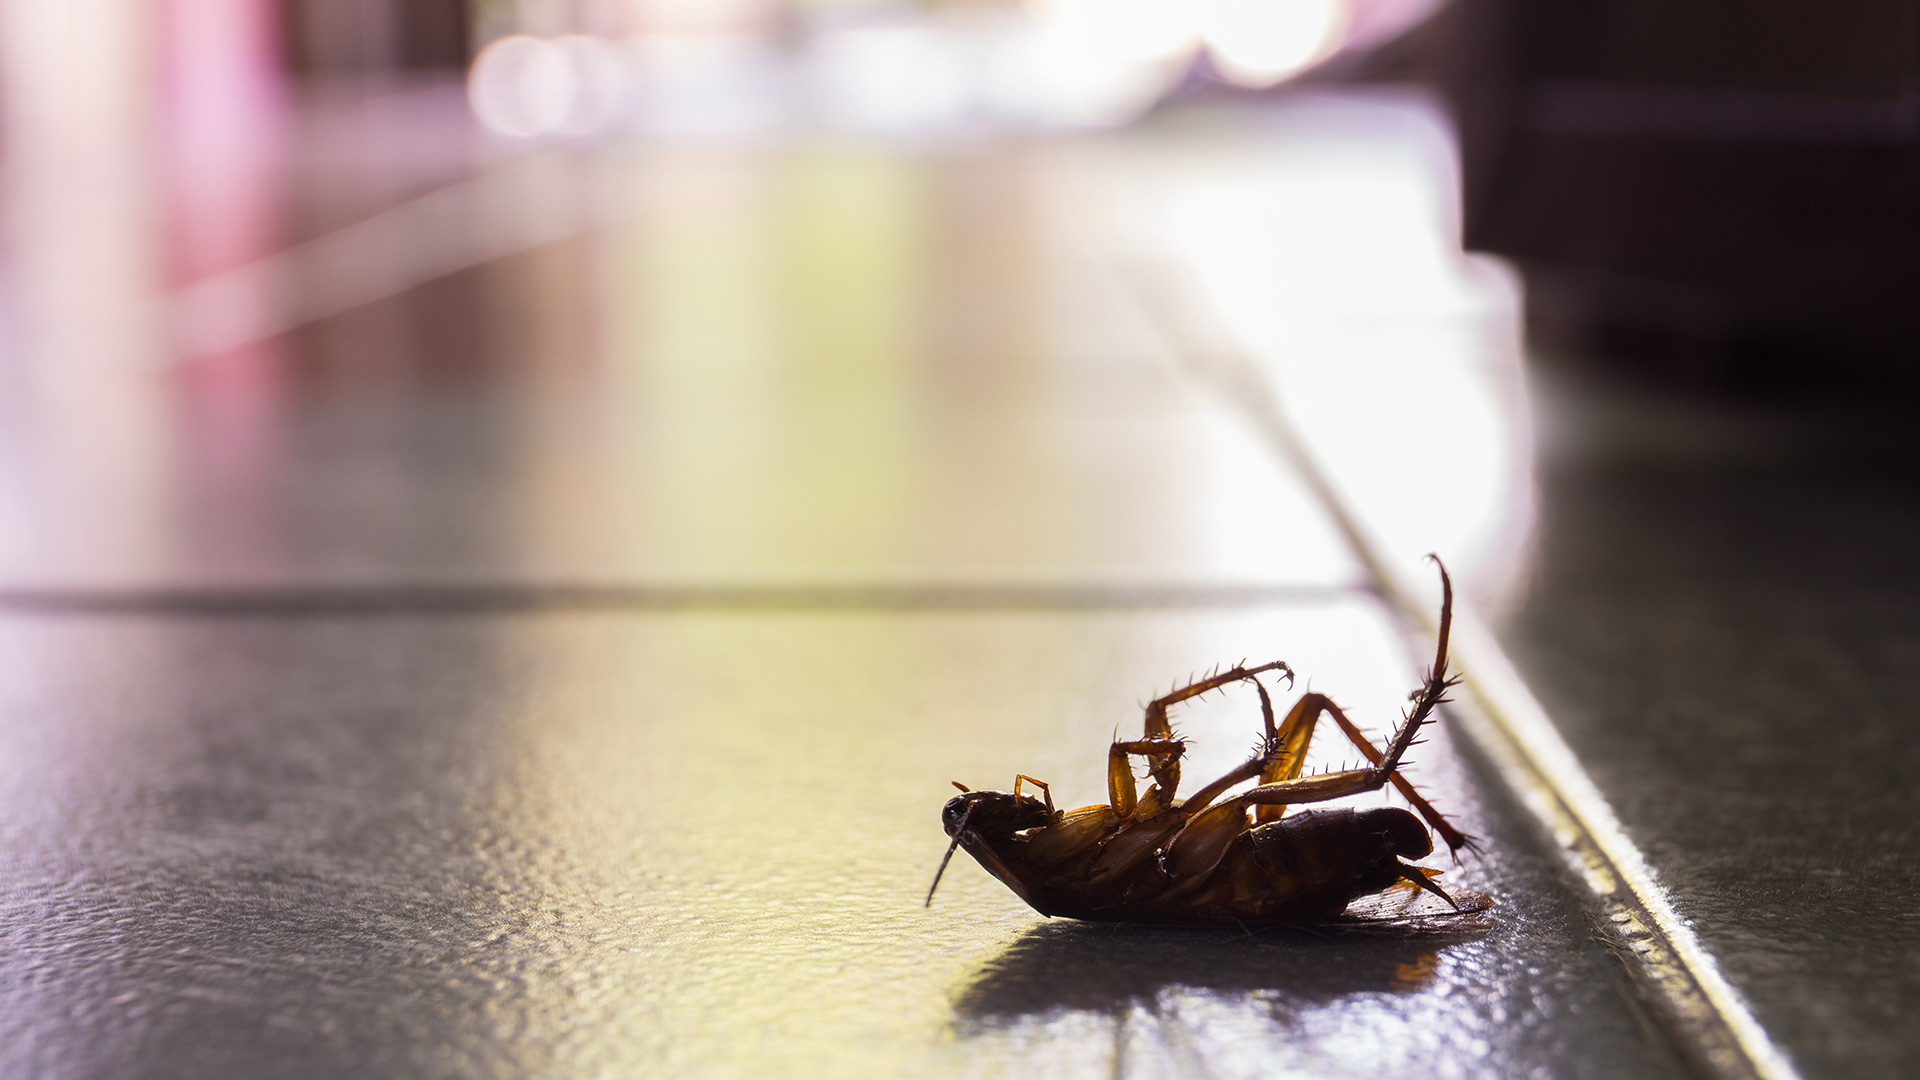 Seeing Roaches or Ants Inside of Your Home or Business? Here’s What to Do